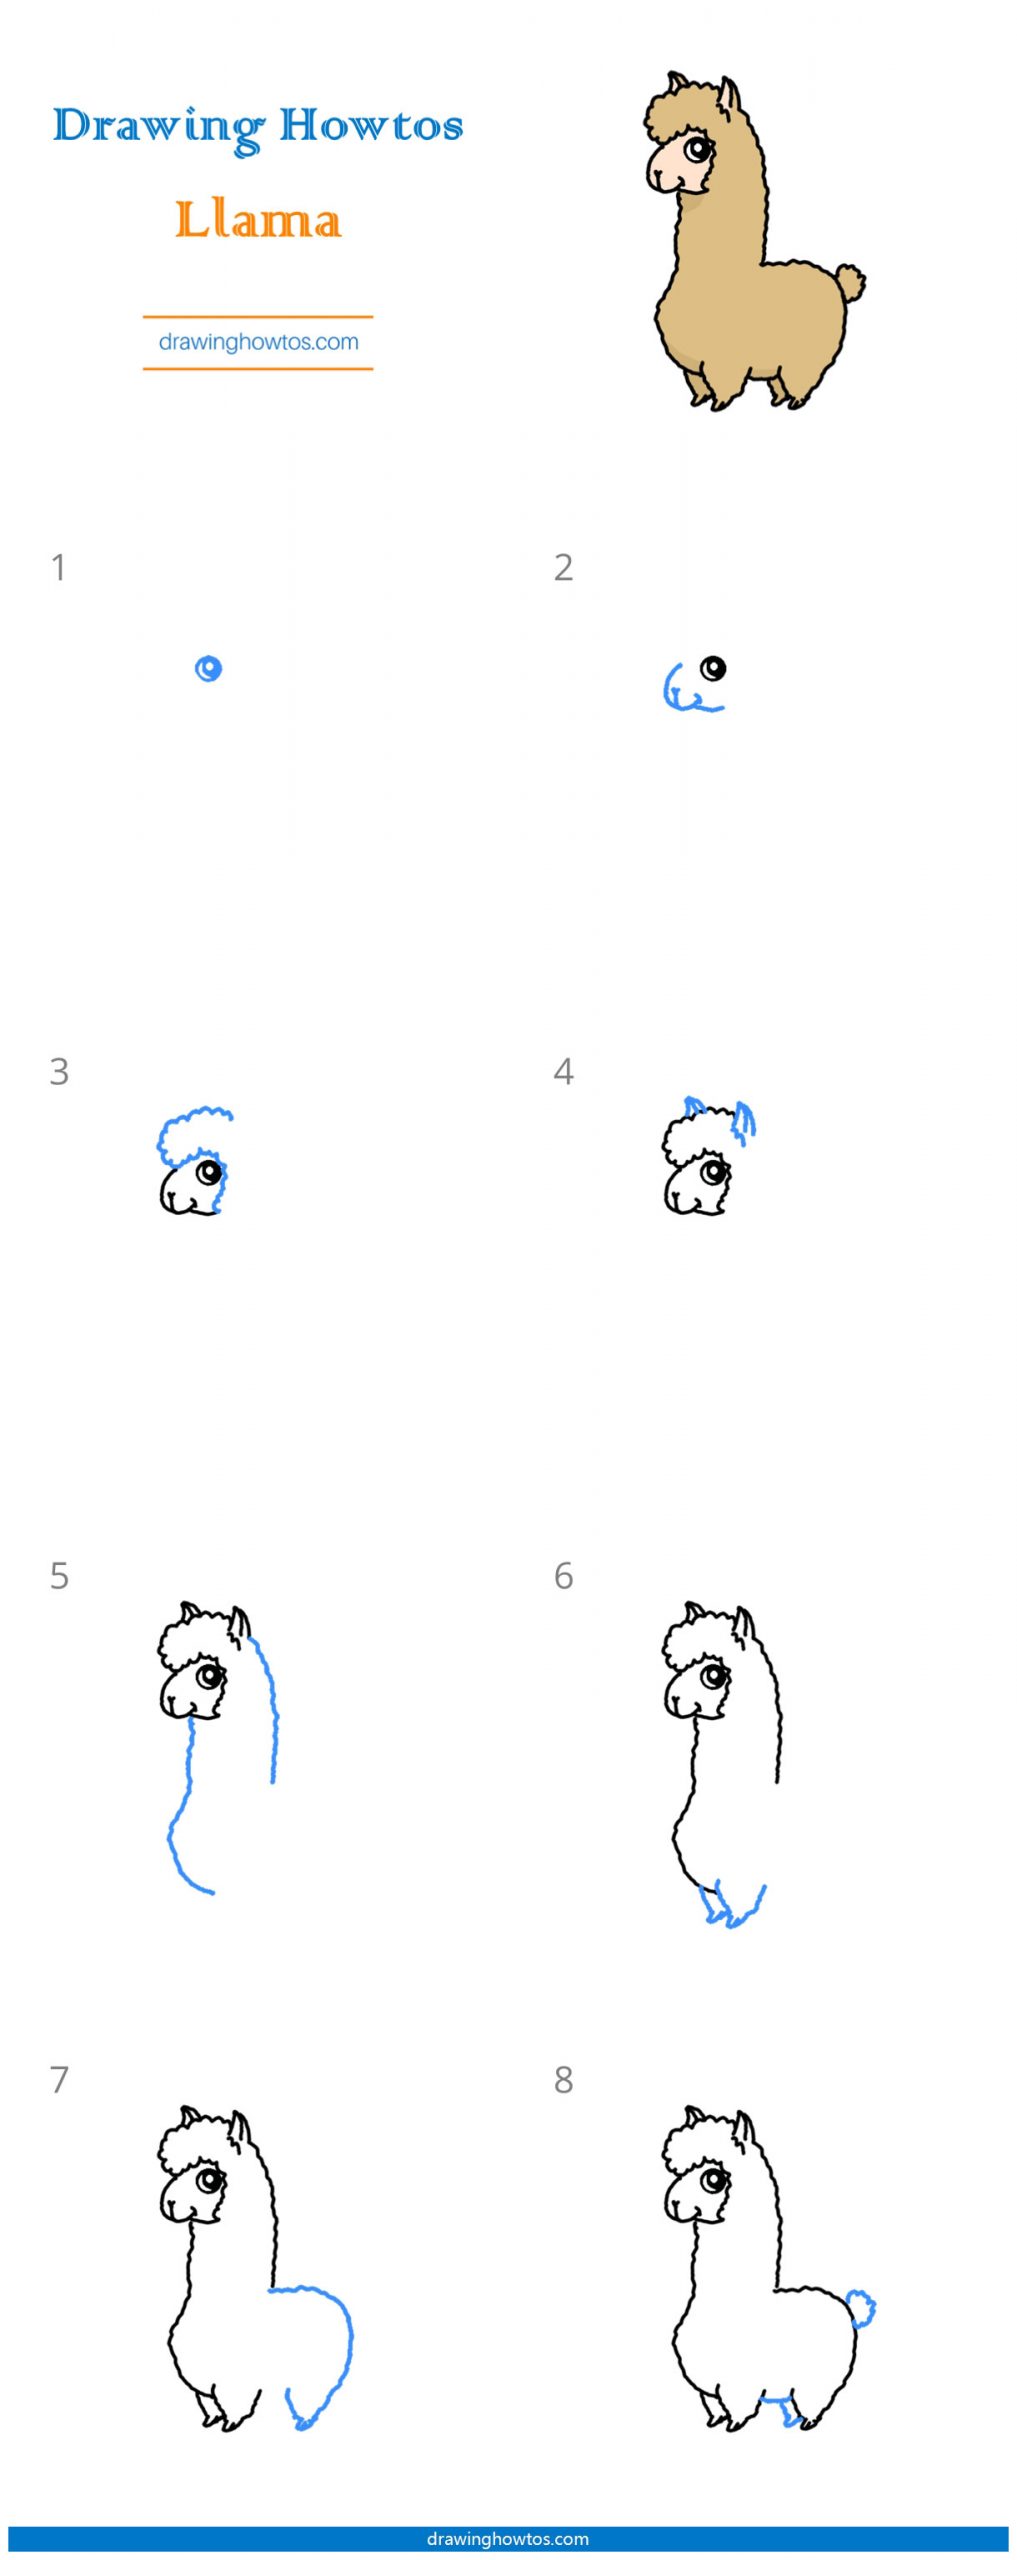 How to Draw a Llama Step by Step